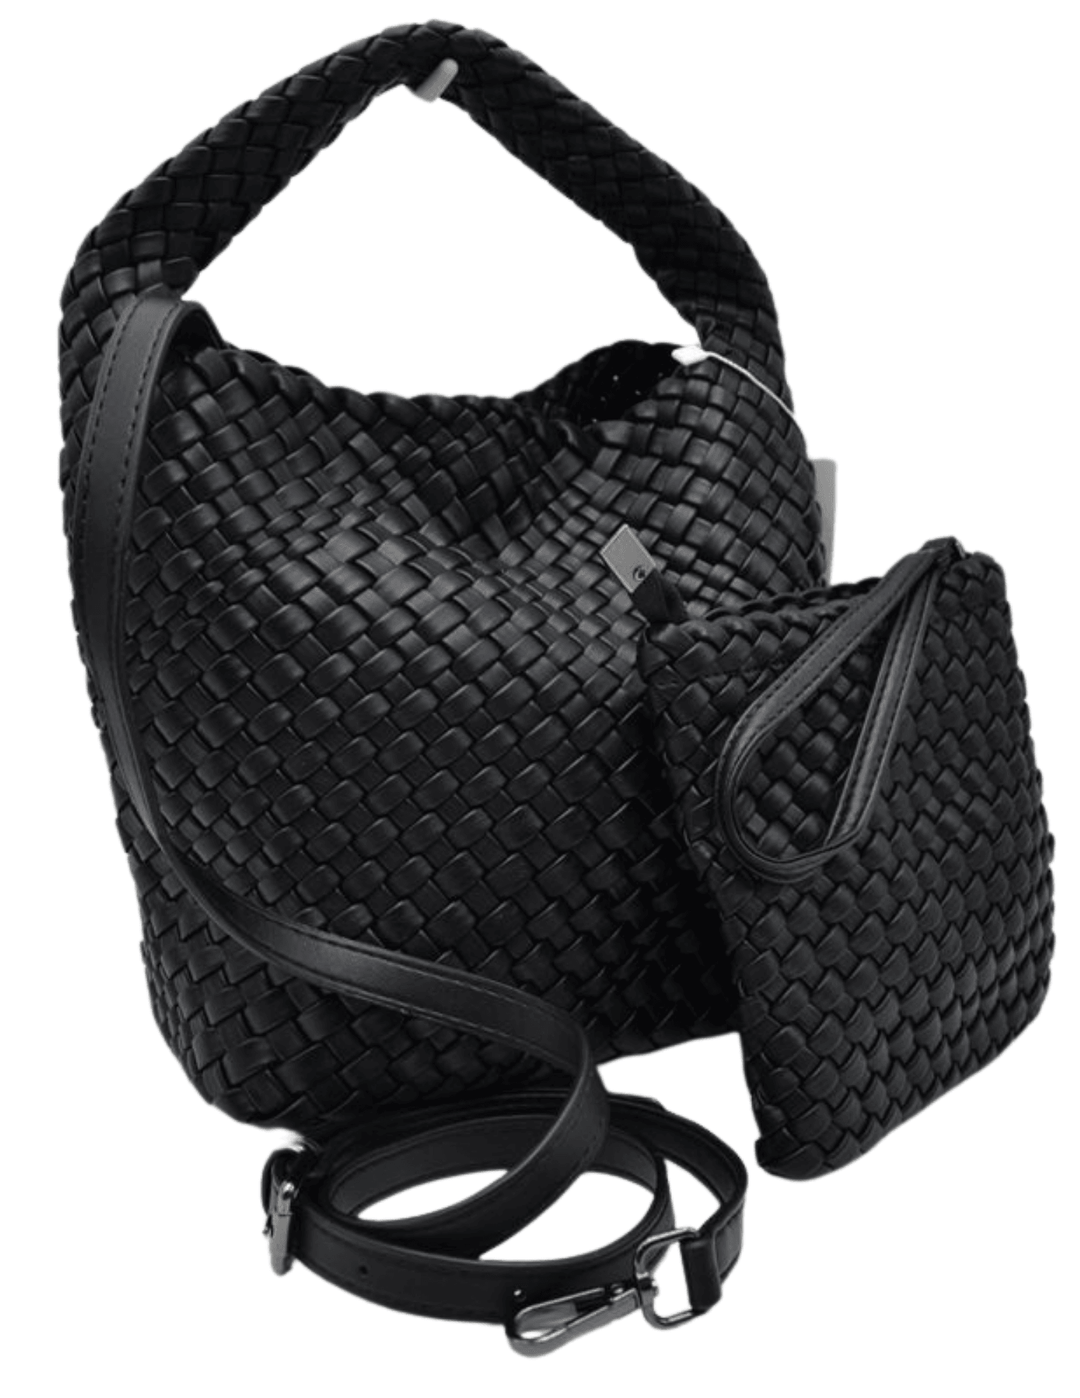 woven hobo tote vegan leather purses wristlet and crossbody at women's online boutique